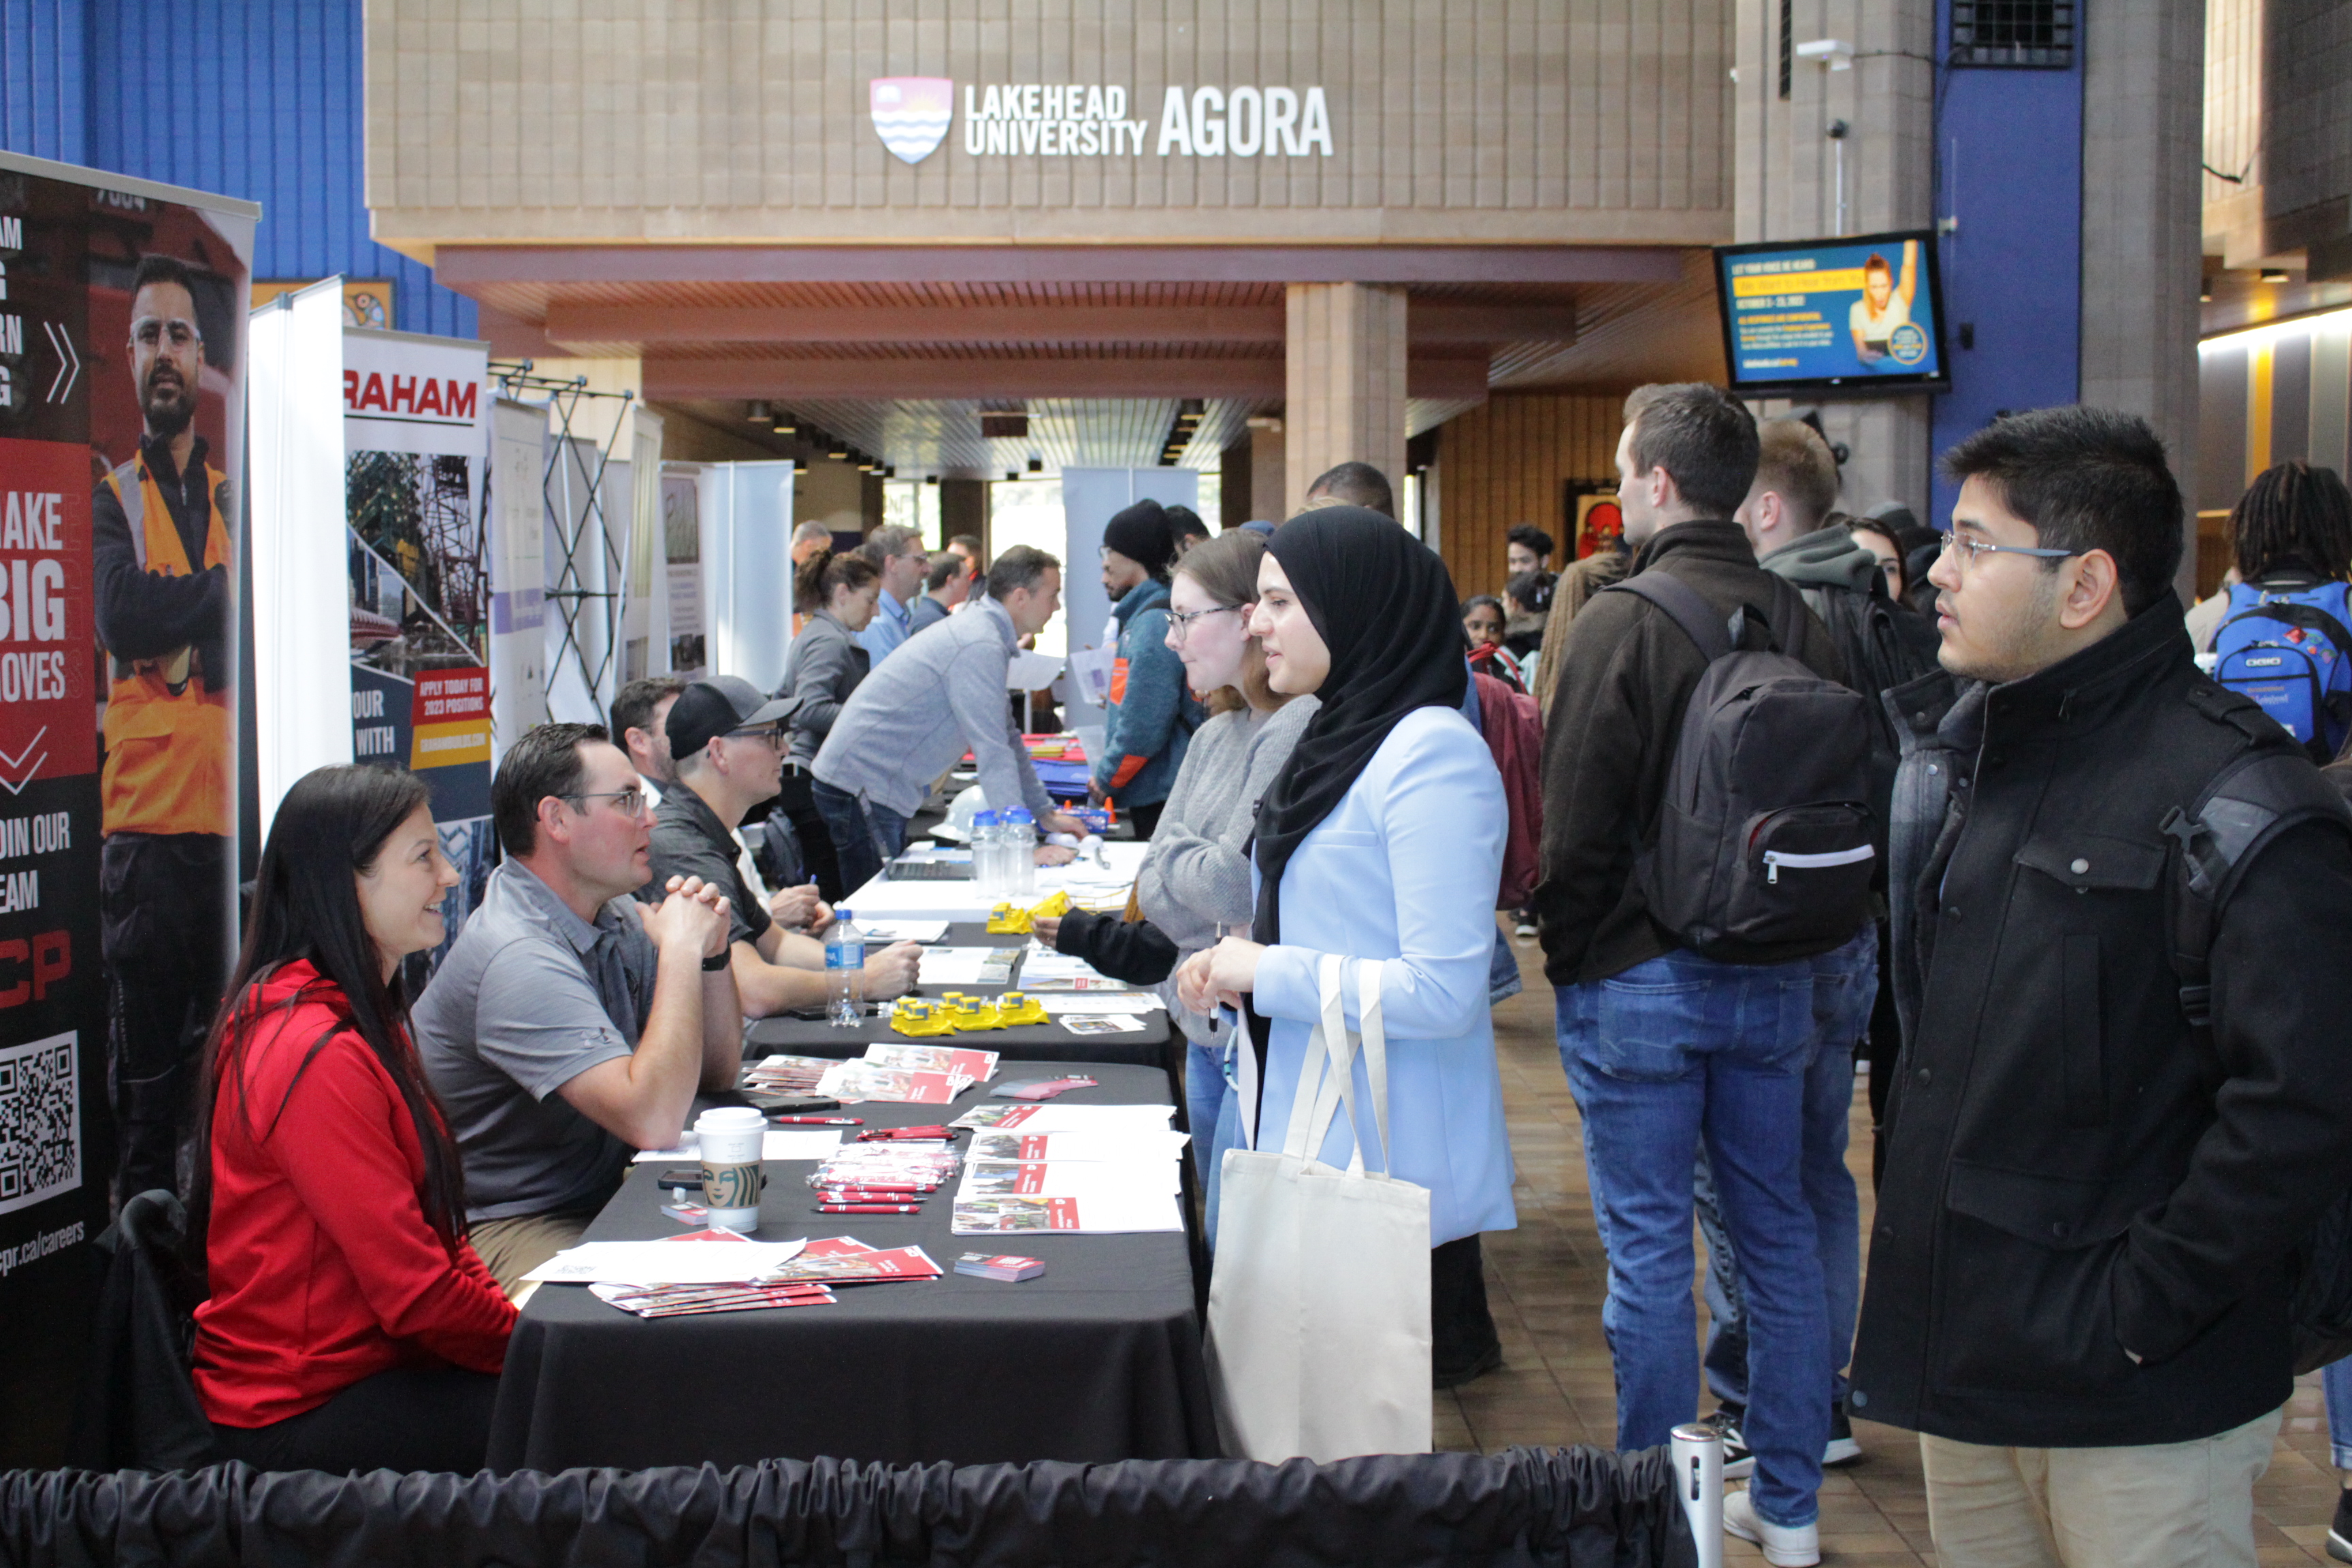 Students can be seen enjoying the career fair in the agora on Lakehead Thunder Bay's campus